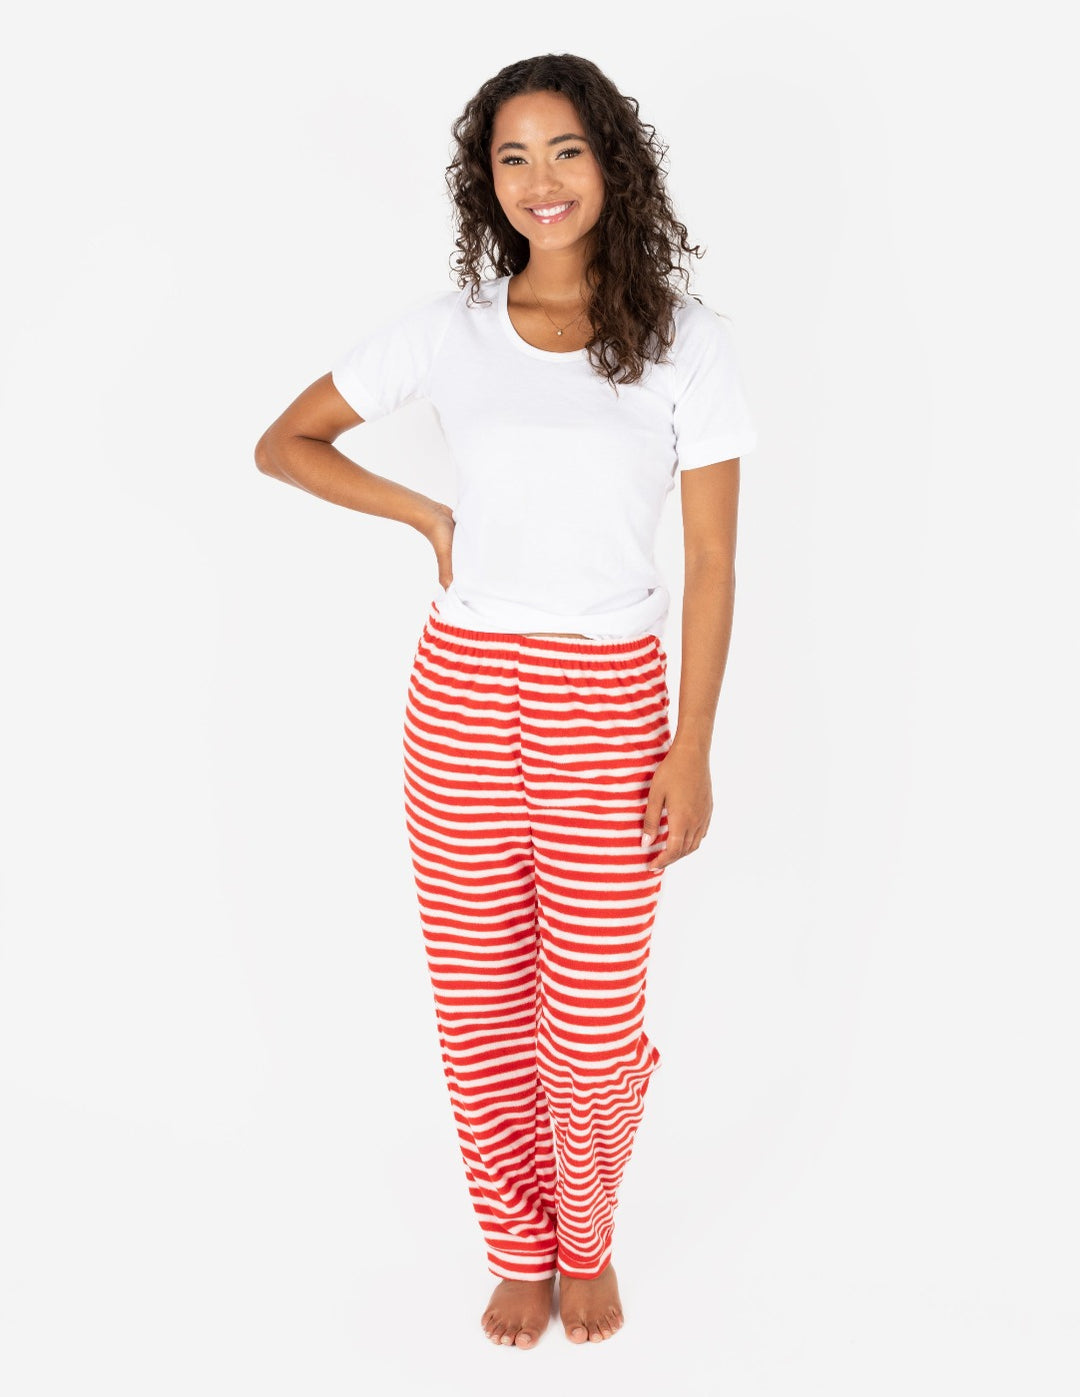 red and white striped women's fleece pants